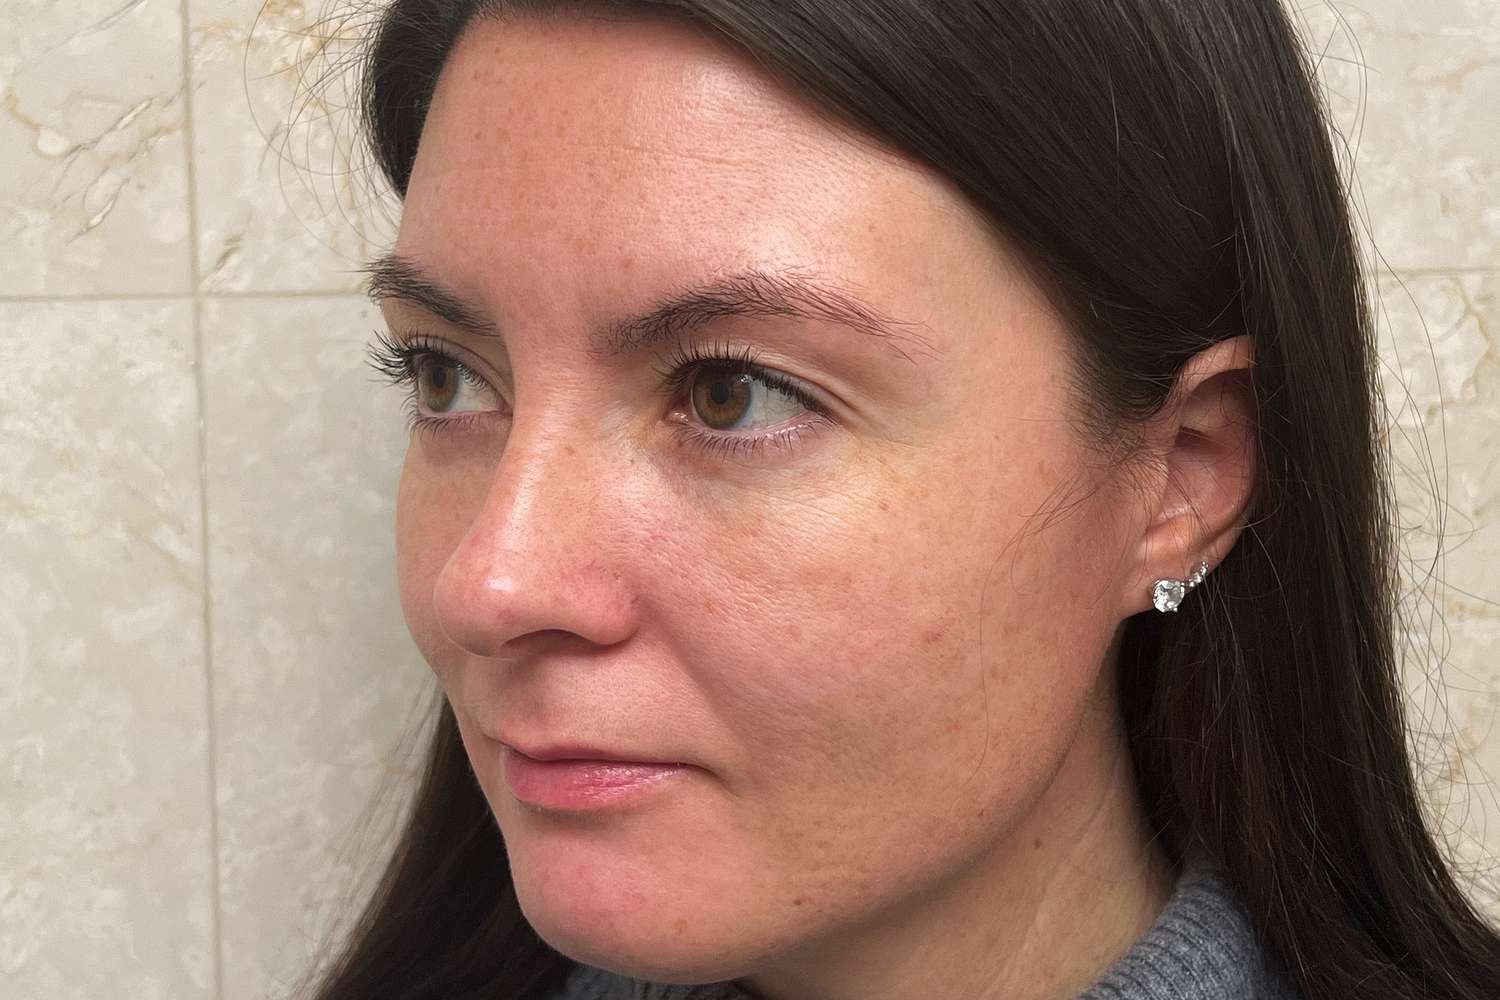 A person showing the side of their face during testing of the Clinique Smart Clinical Repair Wrinkle Correcting Serum